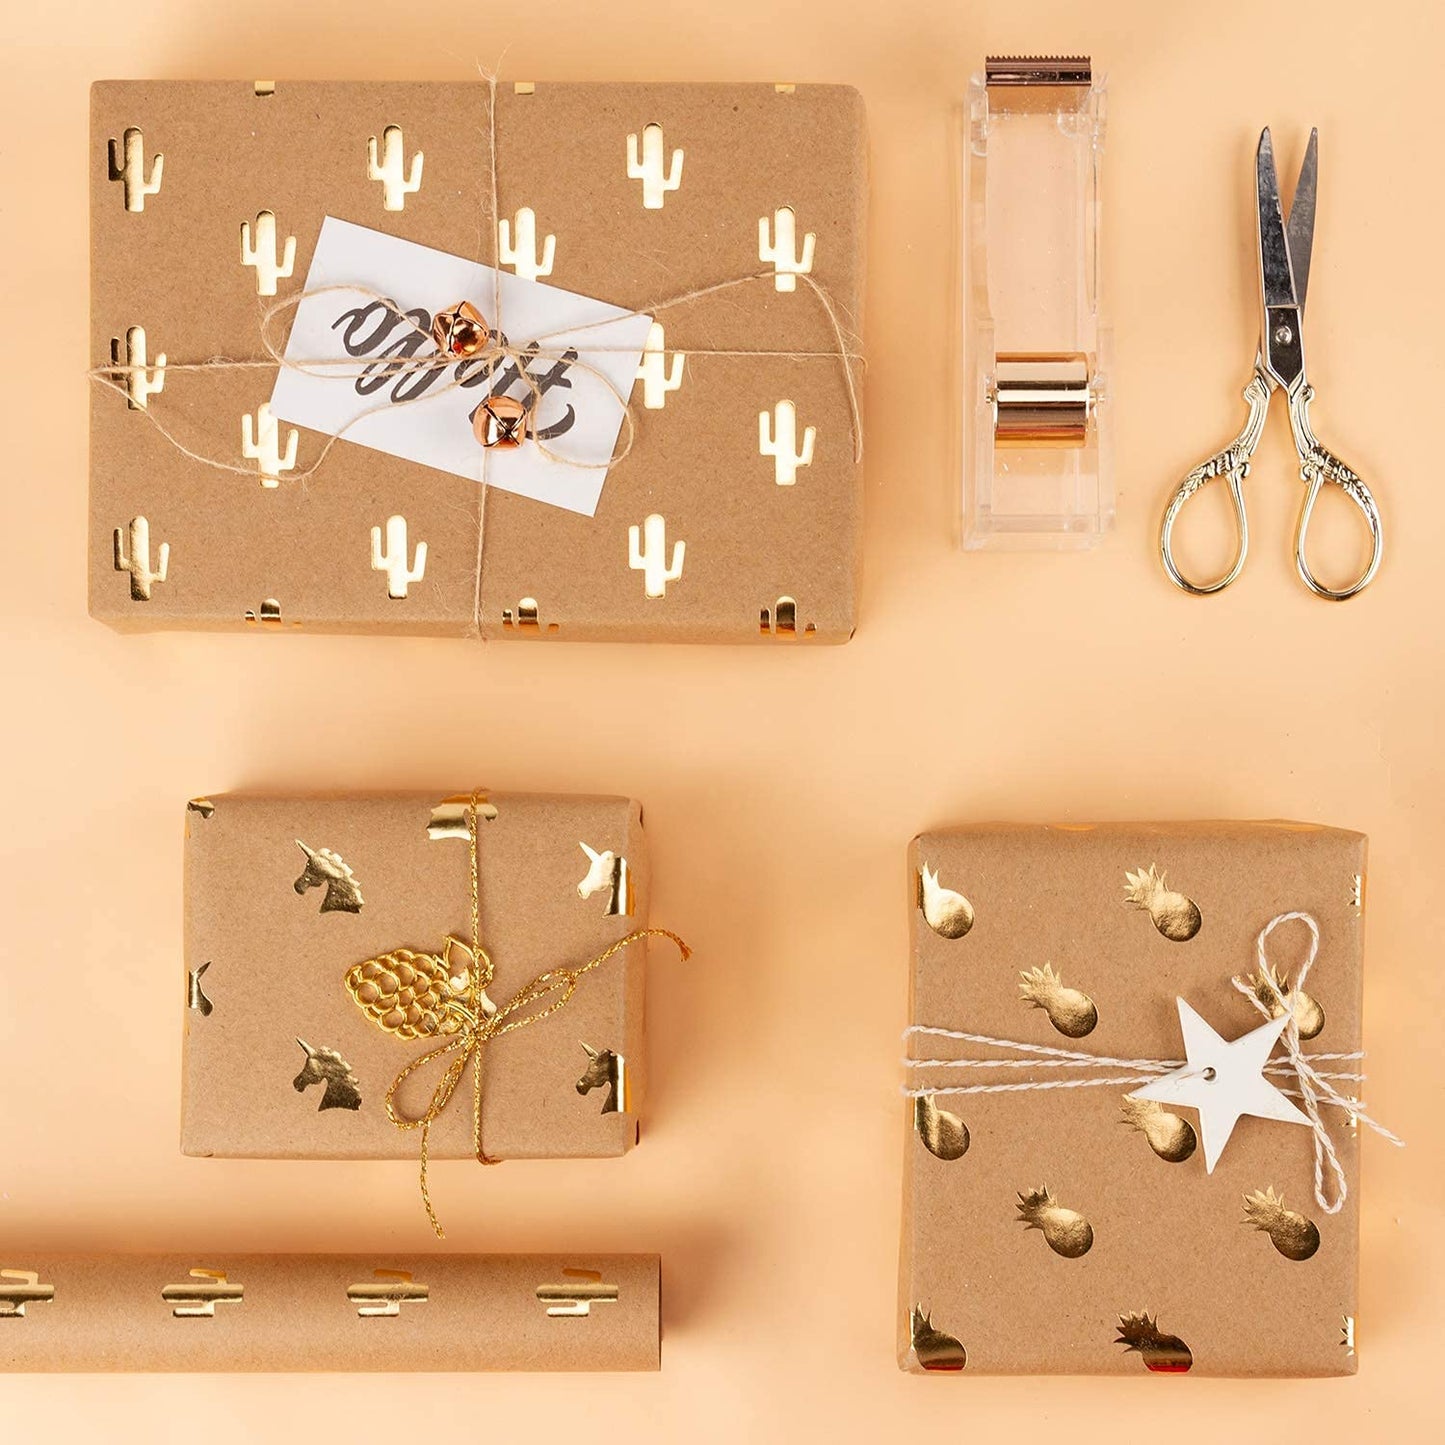 WRAPLA Kraft Wrapping Paper Gold Foil Unicorn Pineapple Cactus Shiny Kraft Paper for Birthday, Holiday, Wedding Wrap - 5 Sheets Packed as 1 roll - 50 X 76cm per Sheet